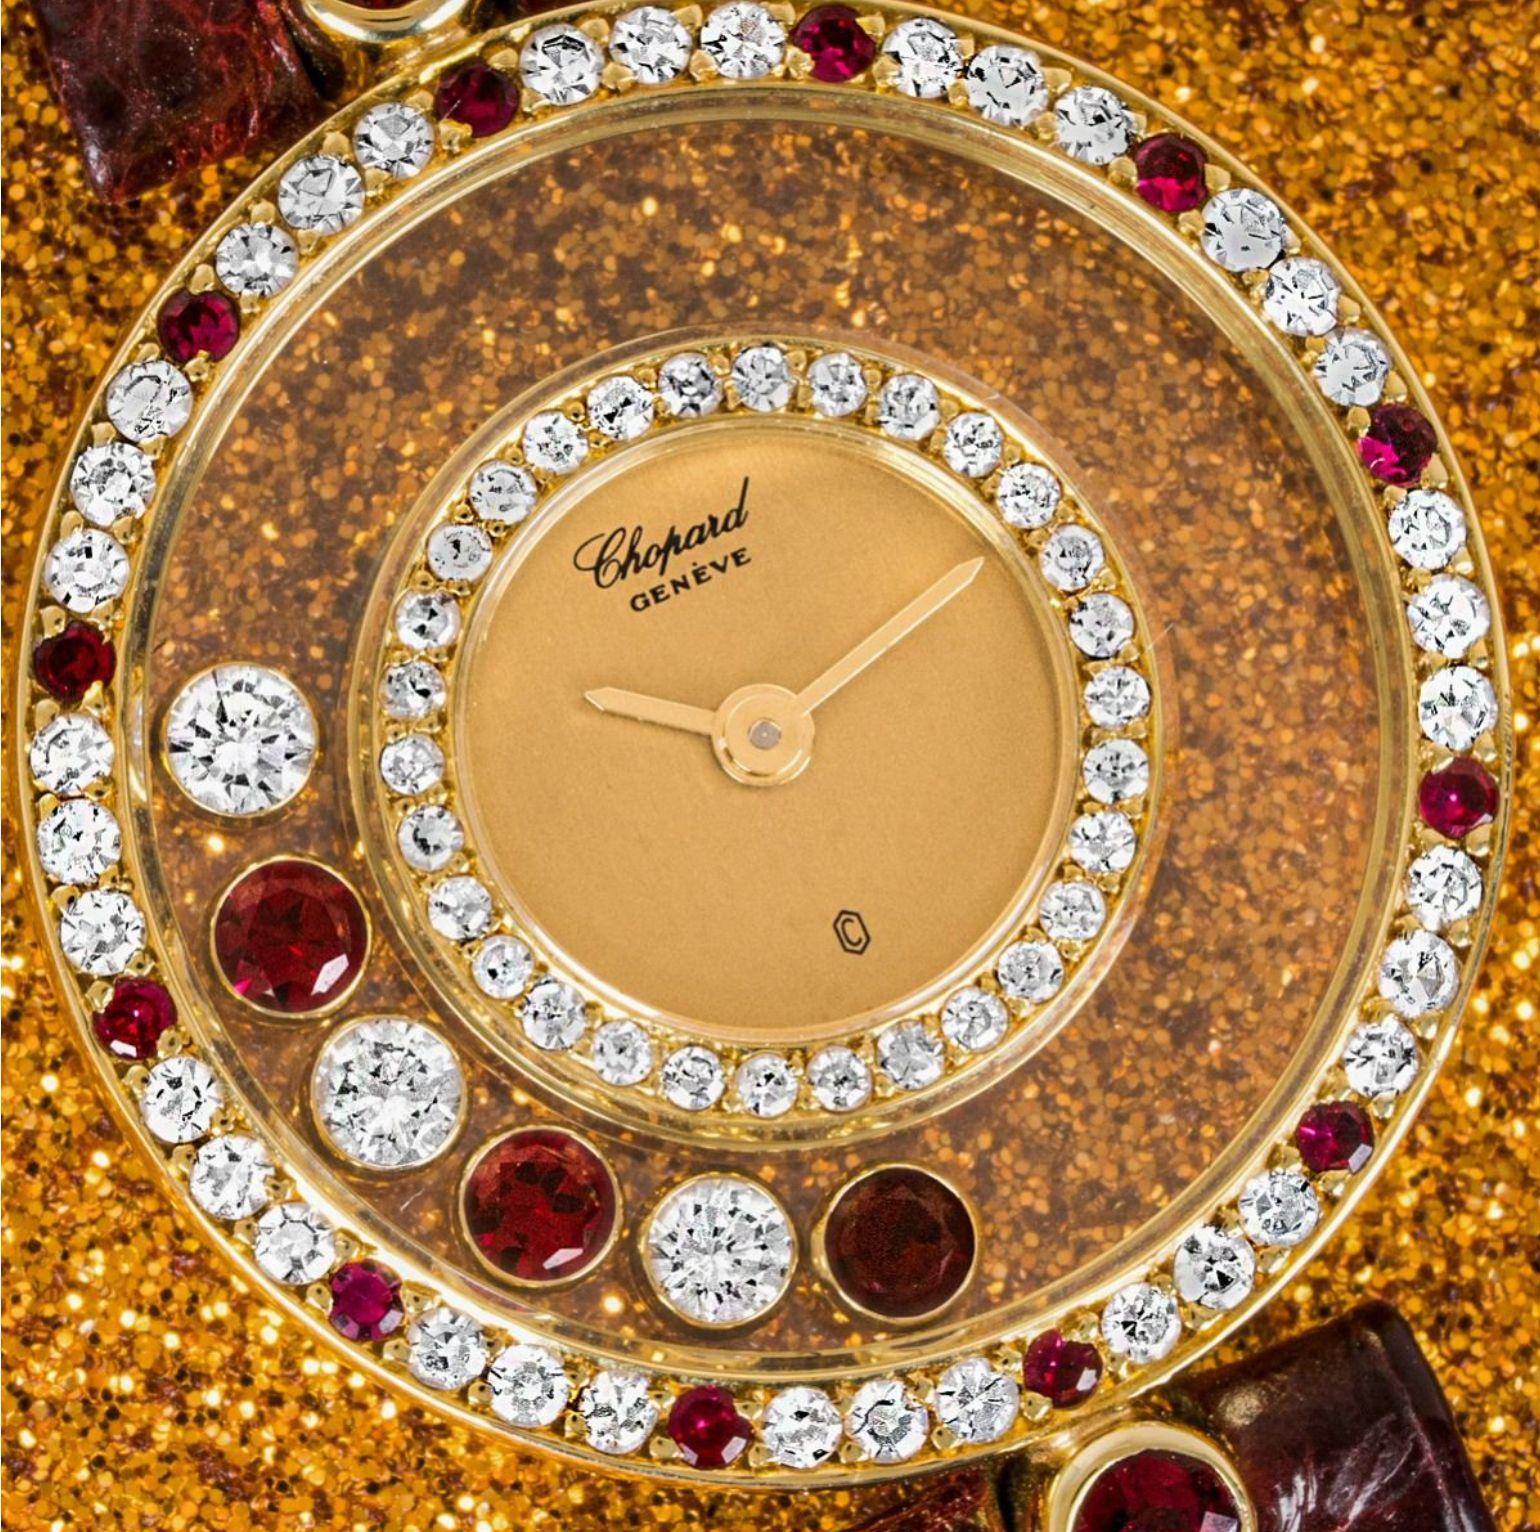 A stunning ladies yellow gold Happy Diamonds wristwatch by Chopard. Featuring a champagne dial with 6 floating rubies & diamonds, and a yellow gold bezel set with 66 round brilliant cut diamonds and 12 rubies. The watch also features 2 ruby-cut